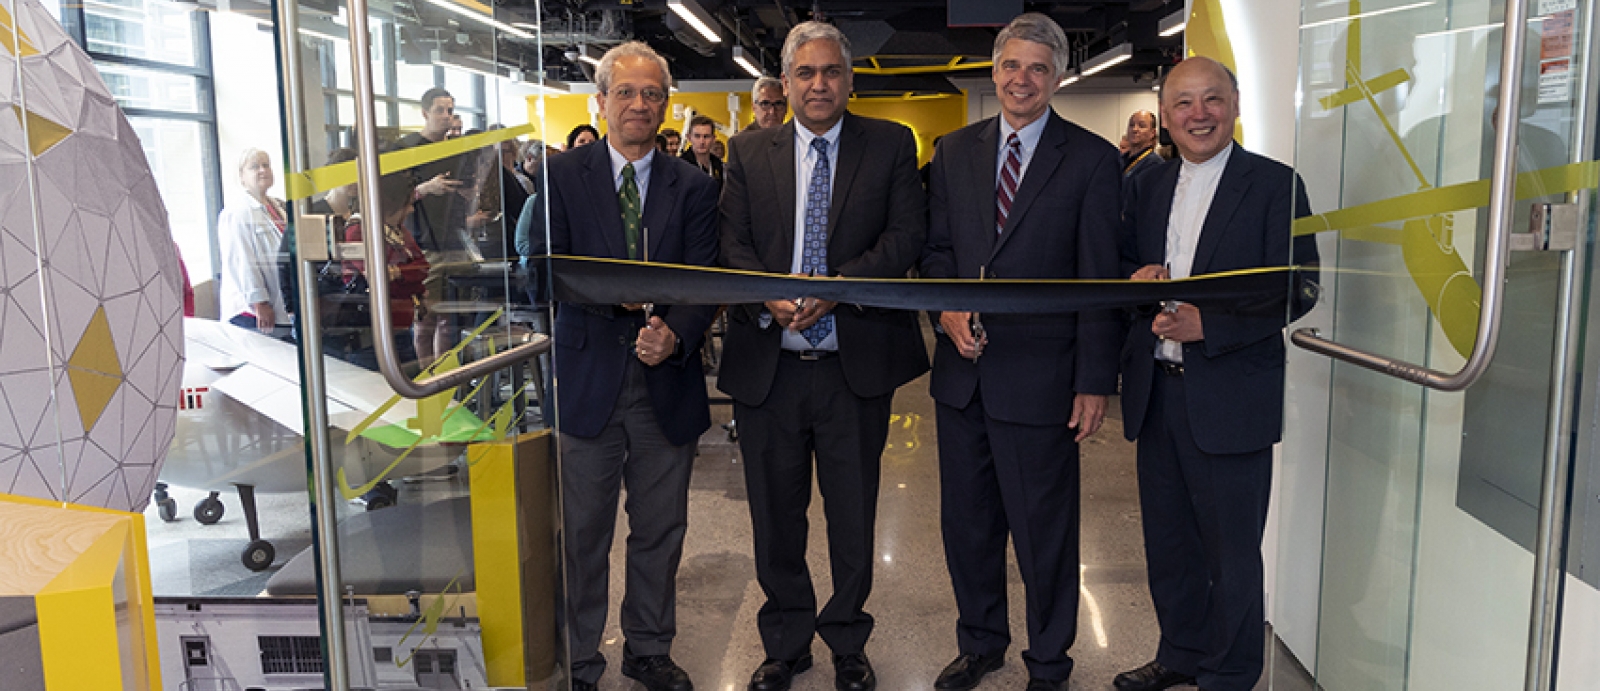 Daniel Hastings, AeroAstro Department Head; Anantha Chandrakasan, Dean, MIT School of Engineering; Eric Evans, Director, Lincoln Laboratory; and Robert Shin, Director, Beaver Works, opened the Beaver Works space in Building 31. 